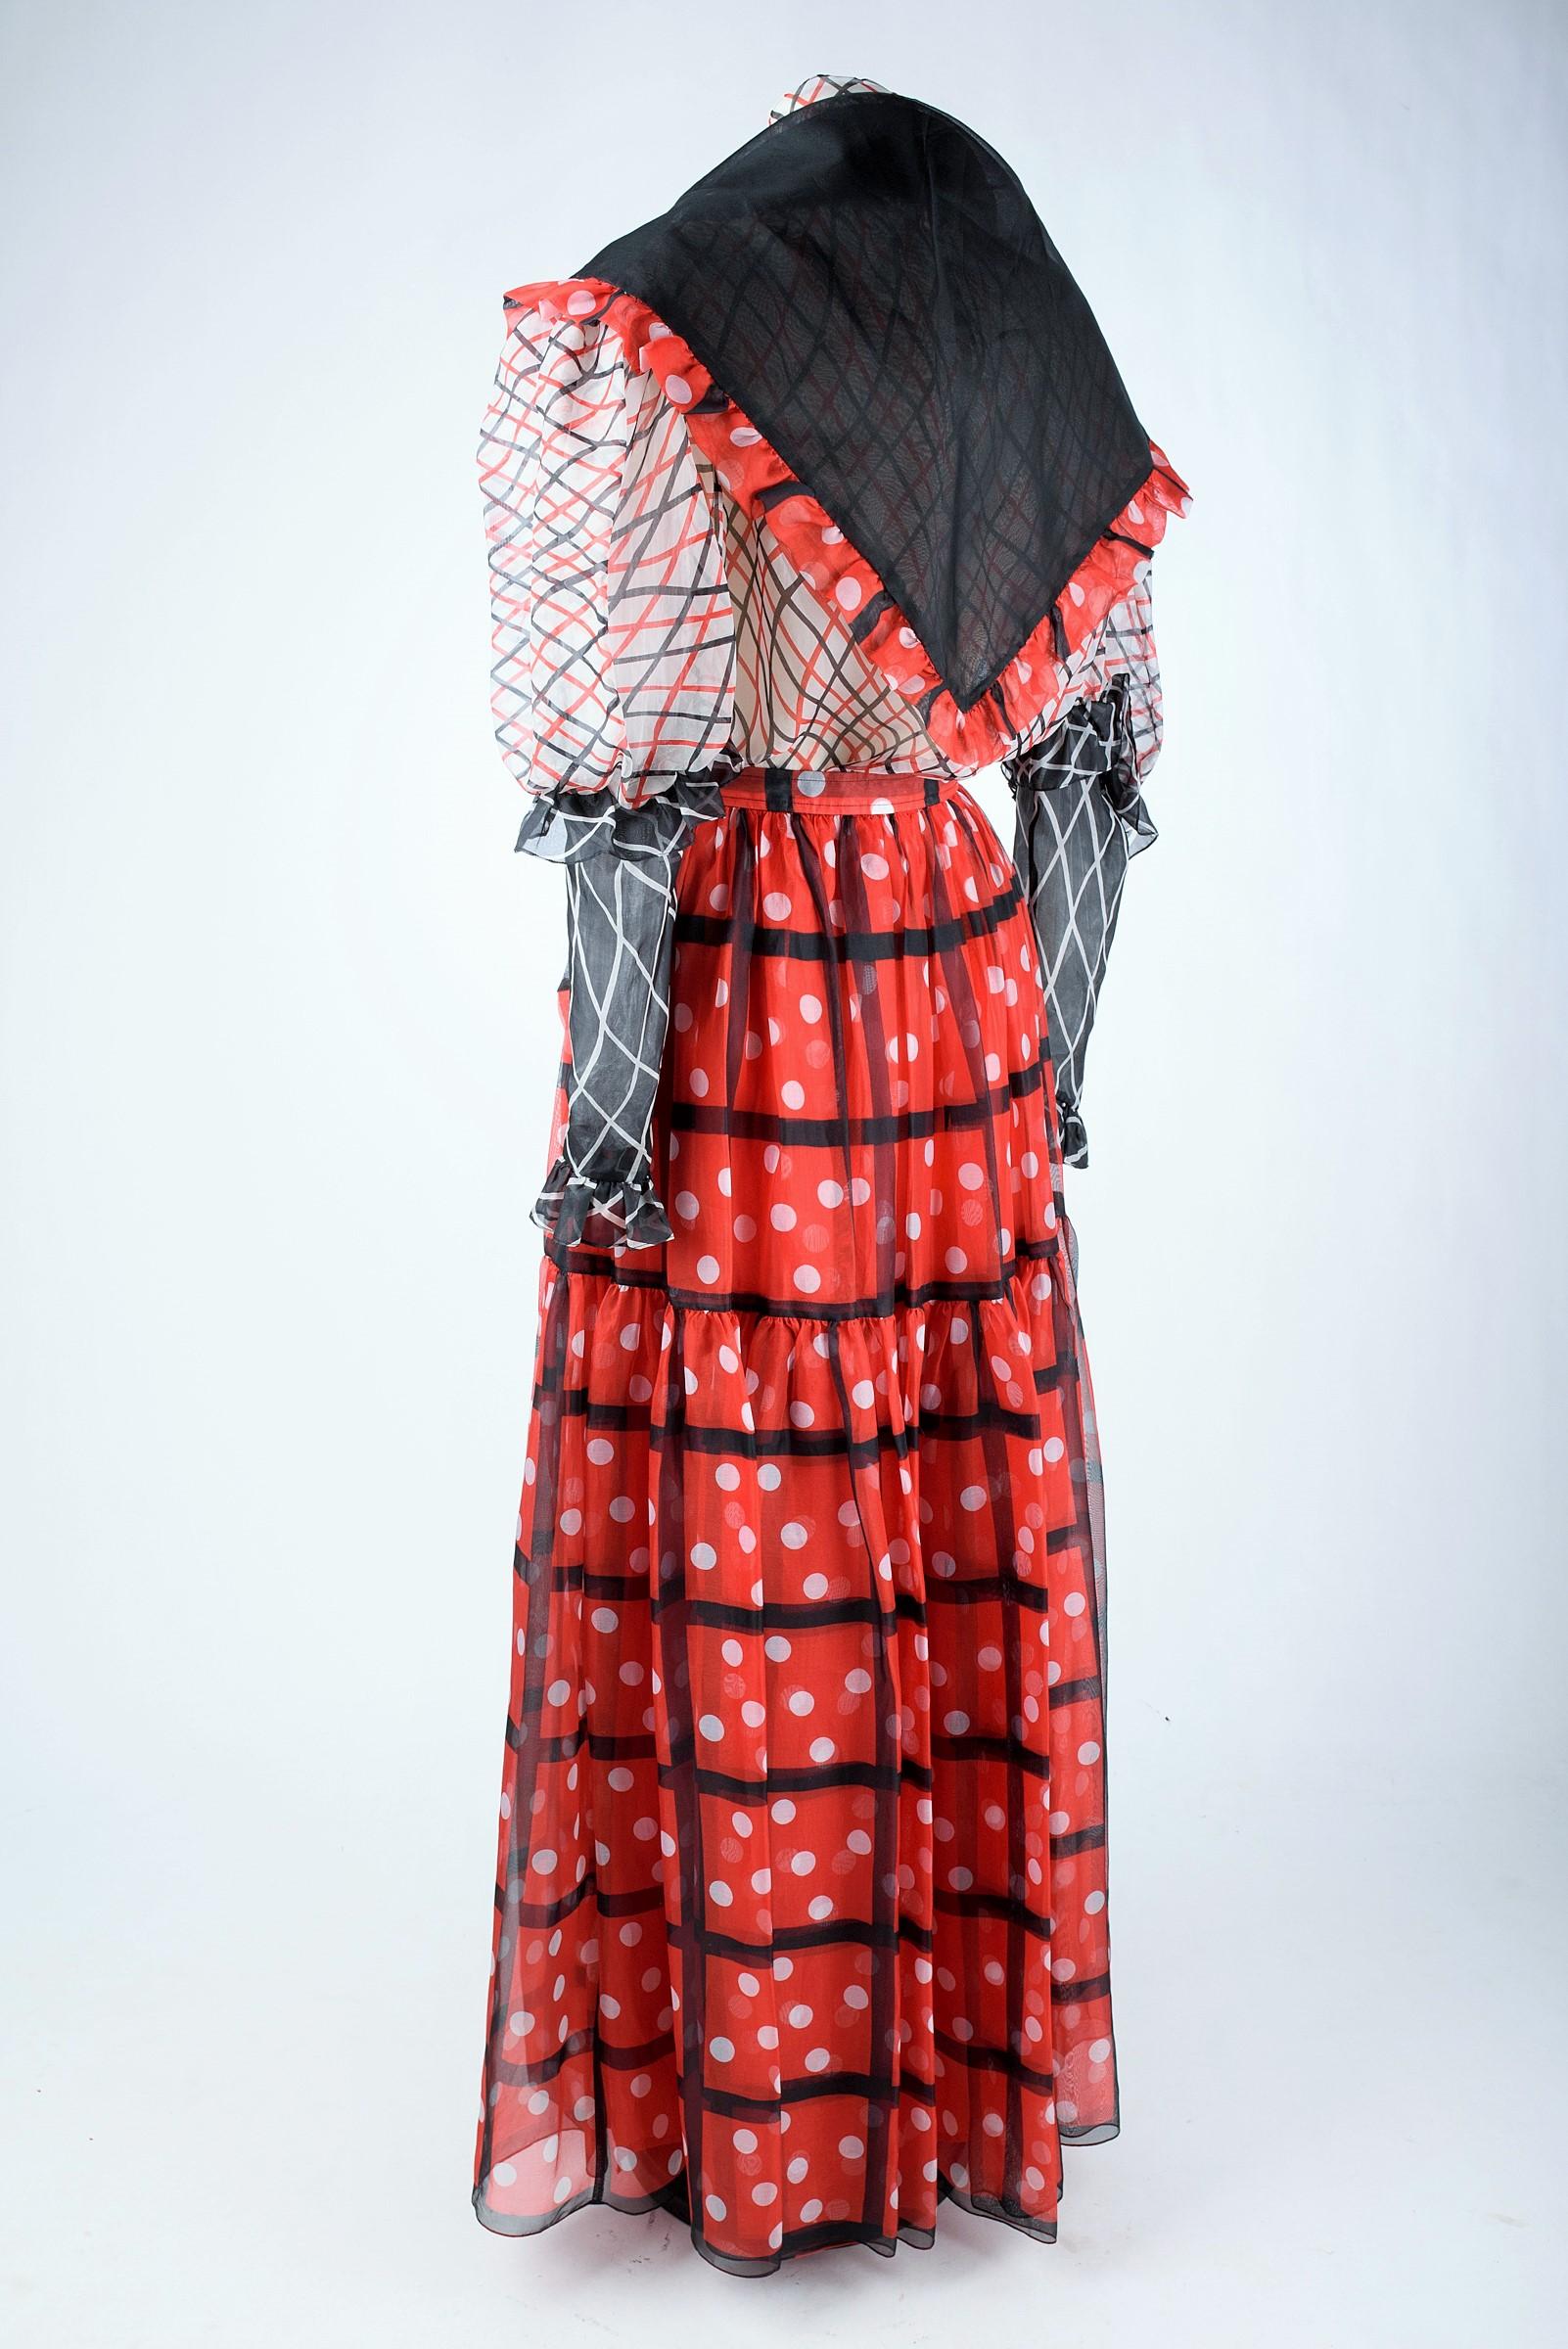 Yves Saint Laurent Printed Chiffon Skirt and Shawl Blouse - Spring Summer 1980 For Sale 8